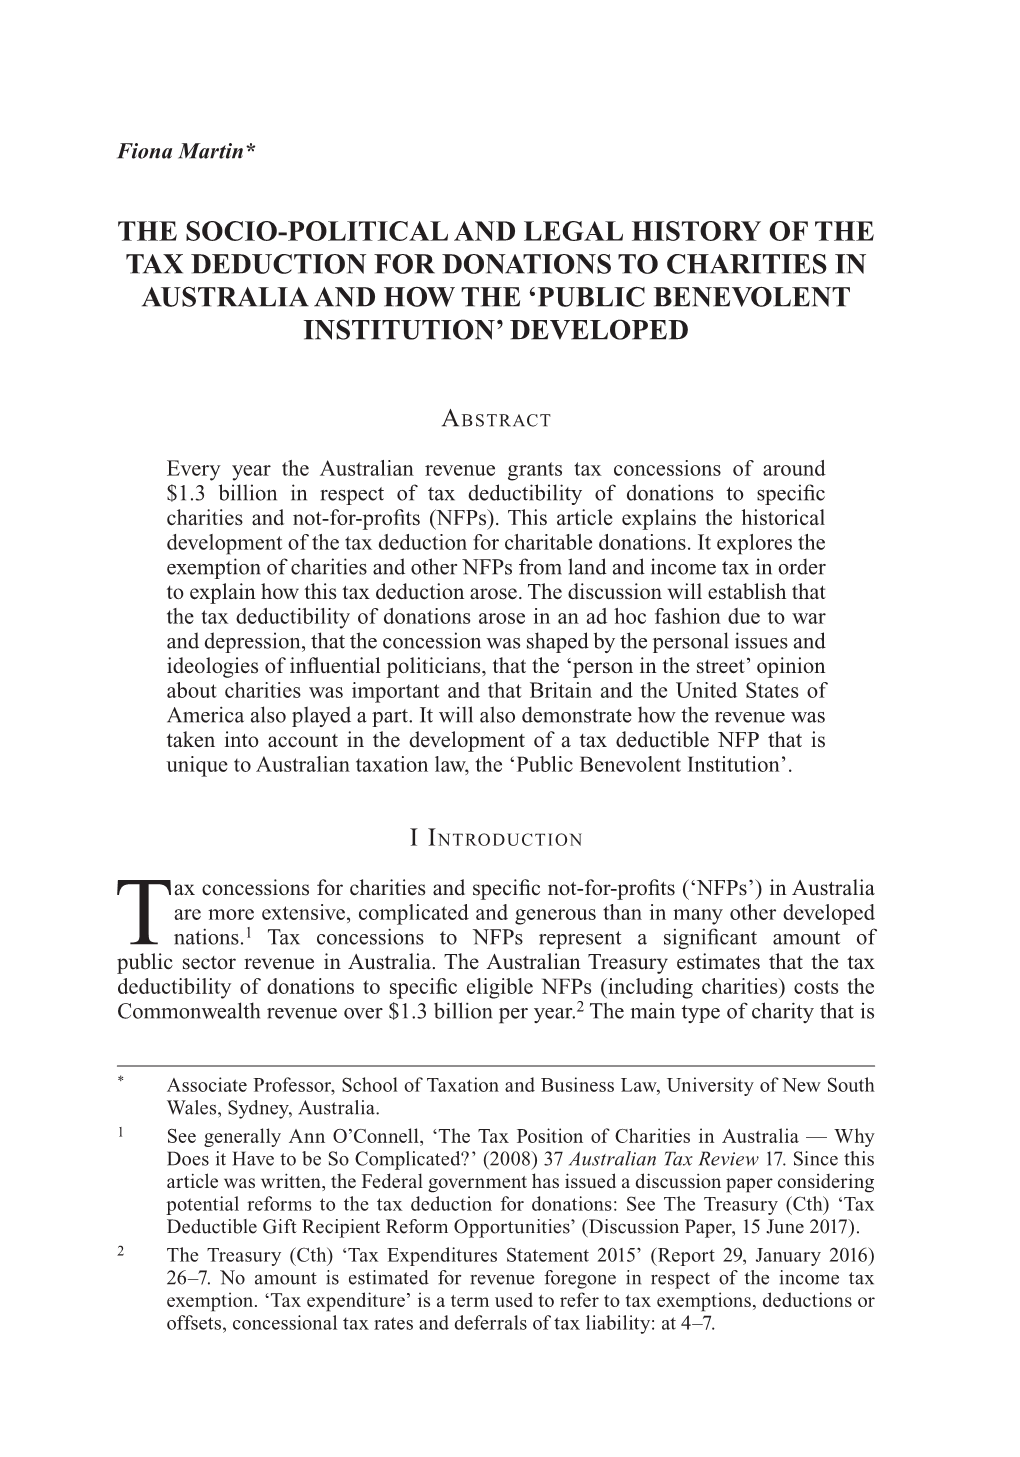 The Socio-Political and Legal History of the Tax Deduction for Donations to Charities in Australia and How the 'Public Benevol